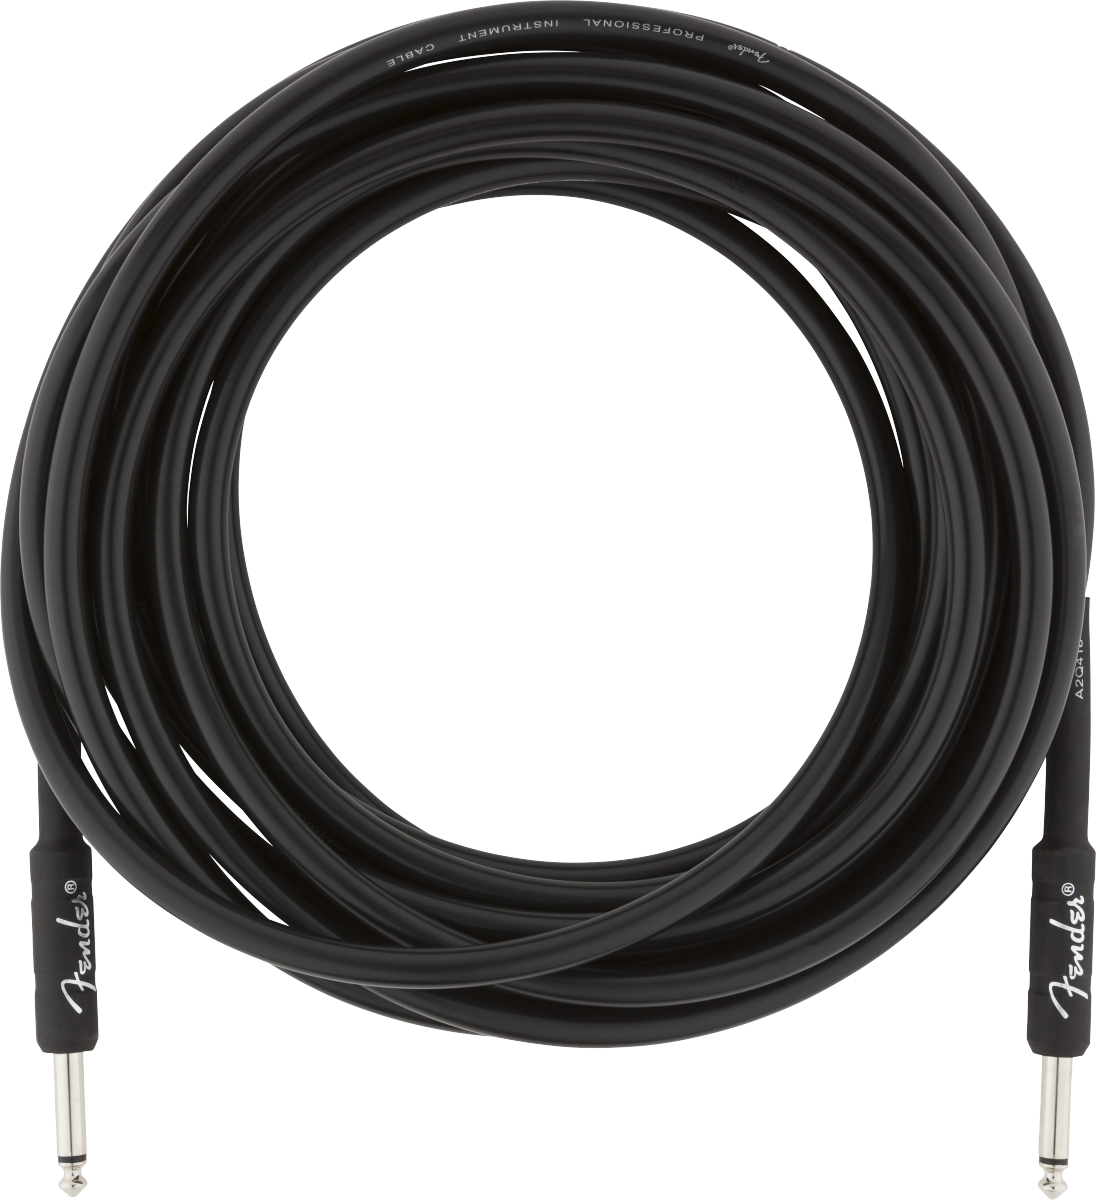 Fender Professional Series 25ft Cable - Straight/Straight Black (25 feet/7.5 meters)